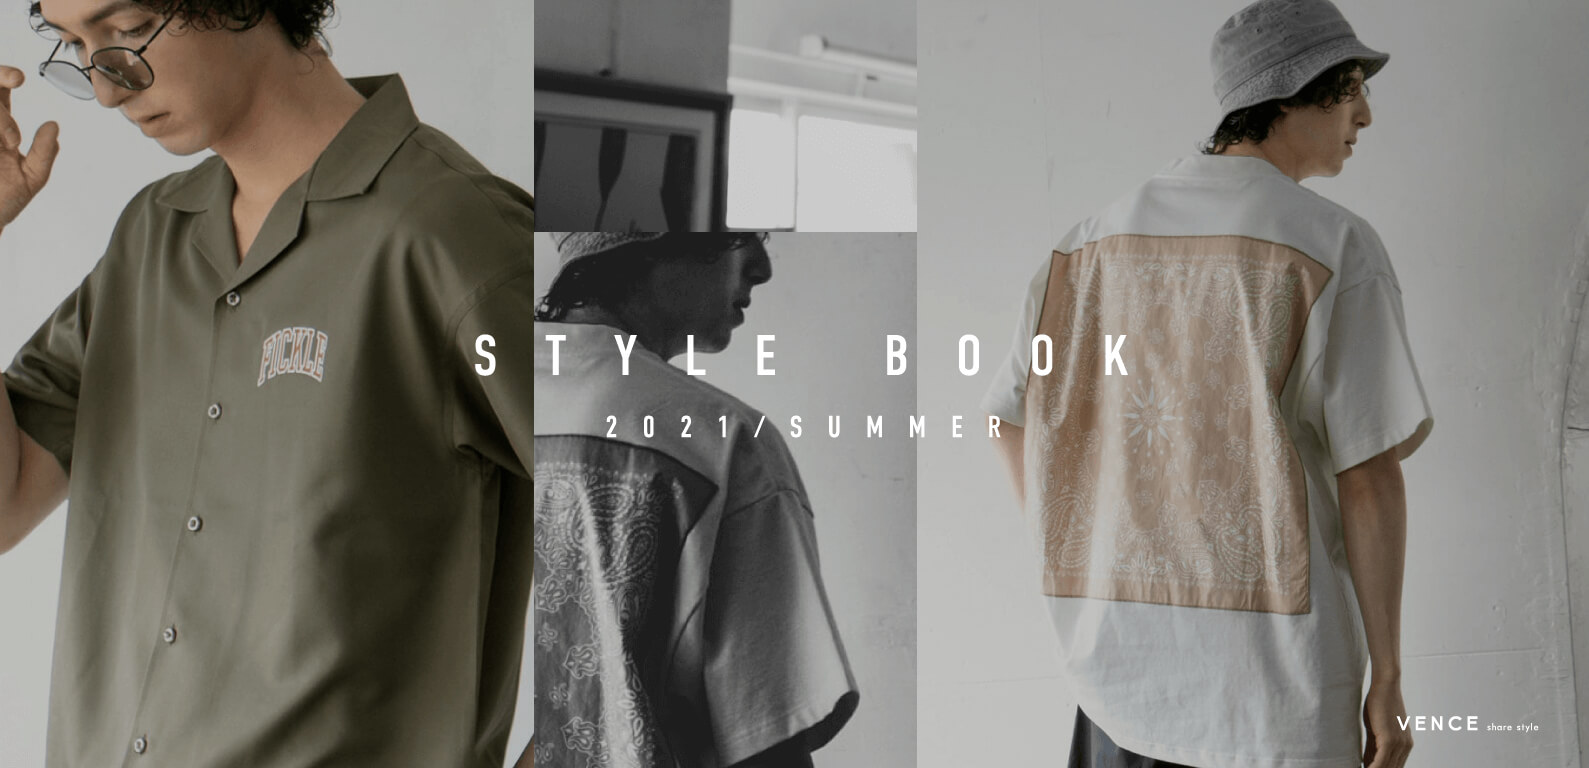 vence style book 2021 summer